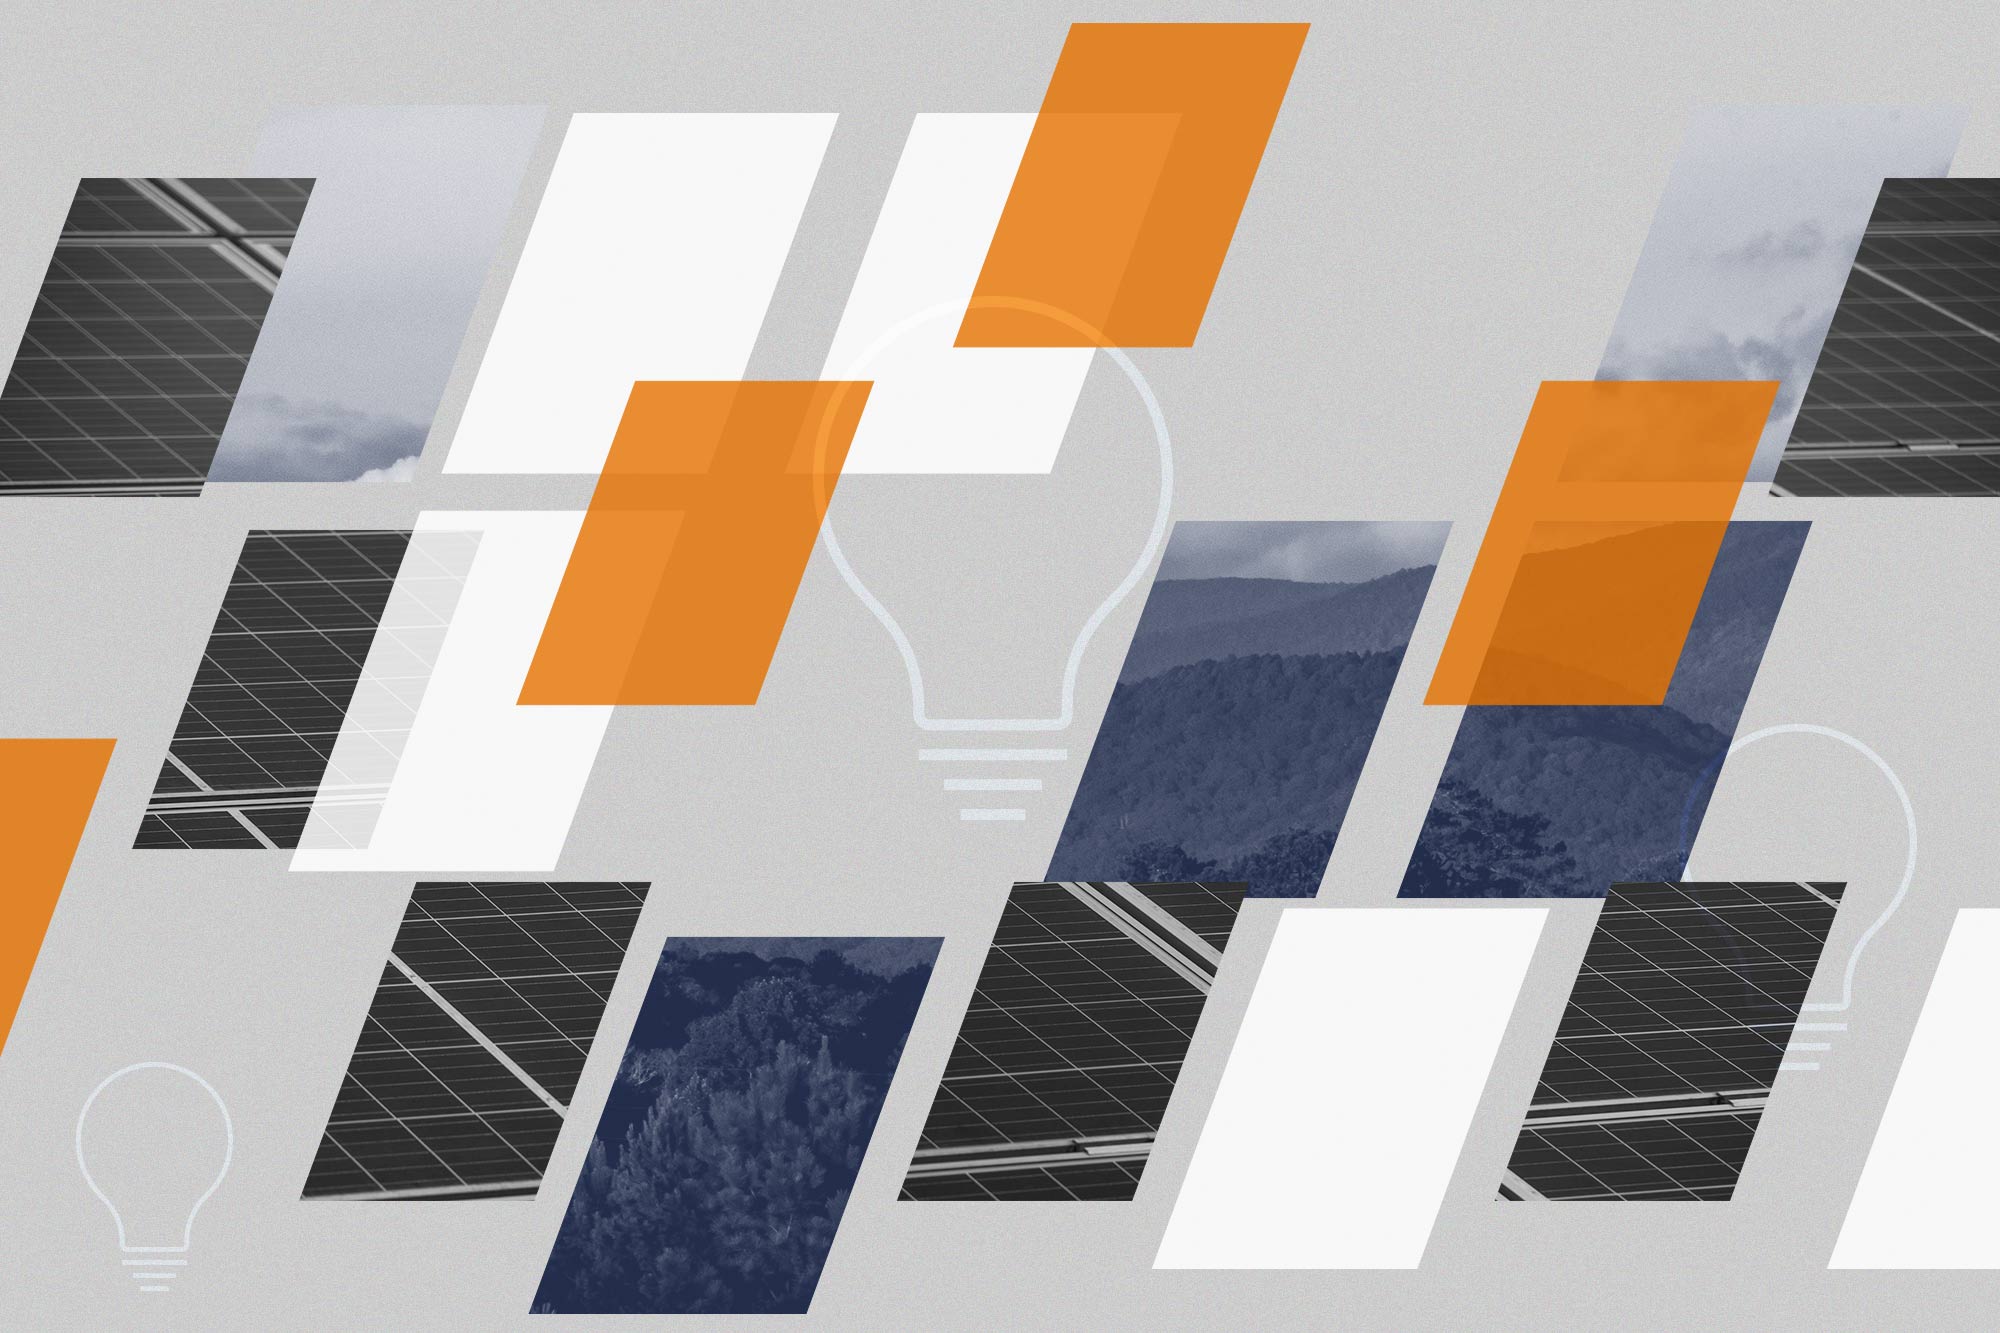 Illustration of various overlapping parallelograms in orange, blue, and white revelaing solar panels and the blue ridge mountains. Three lightbulbs are floating in the background. 